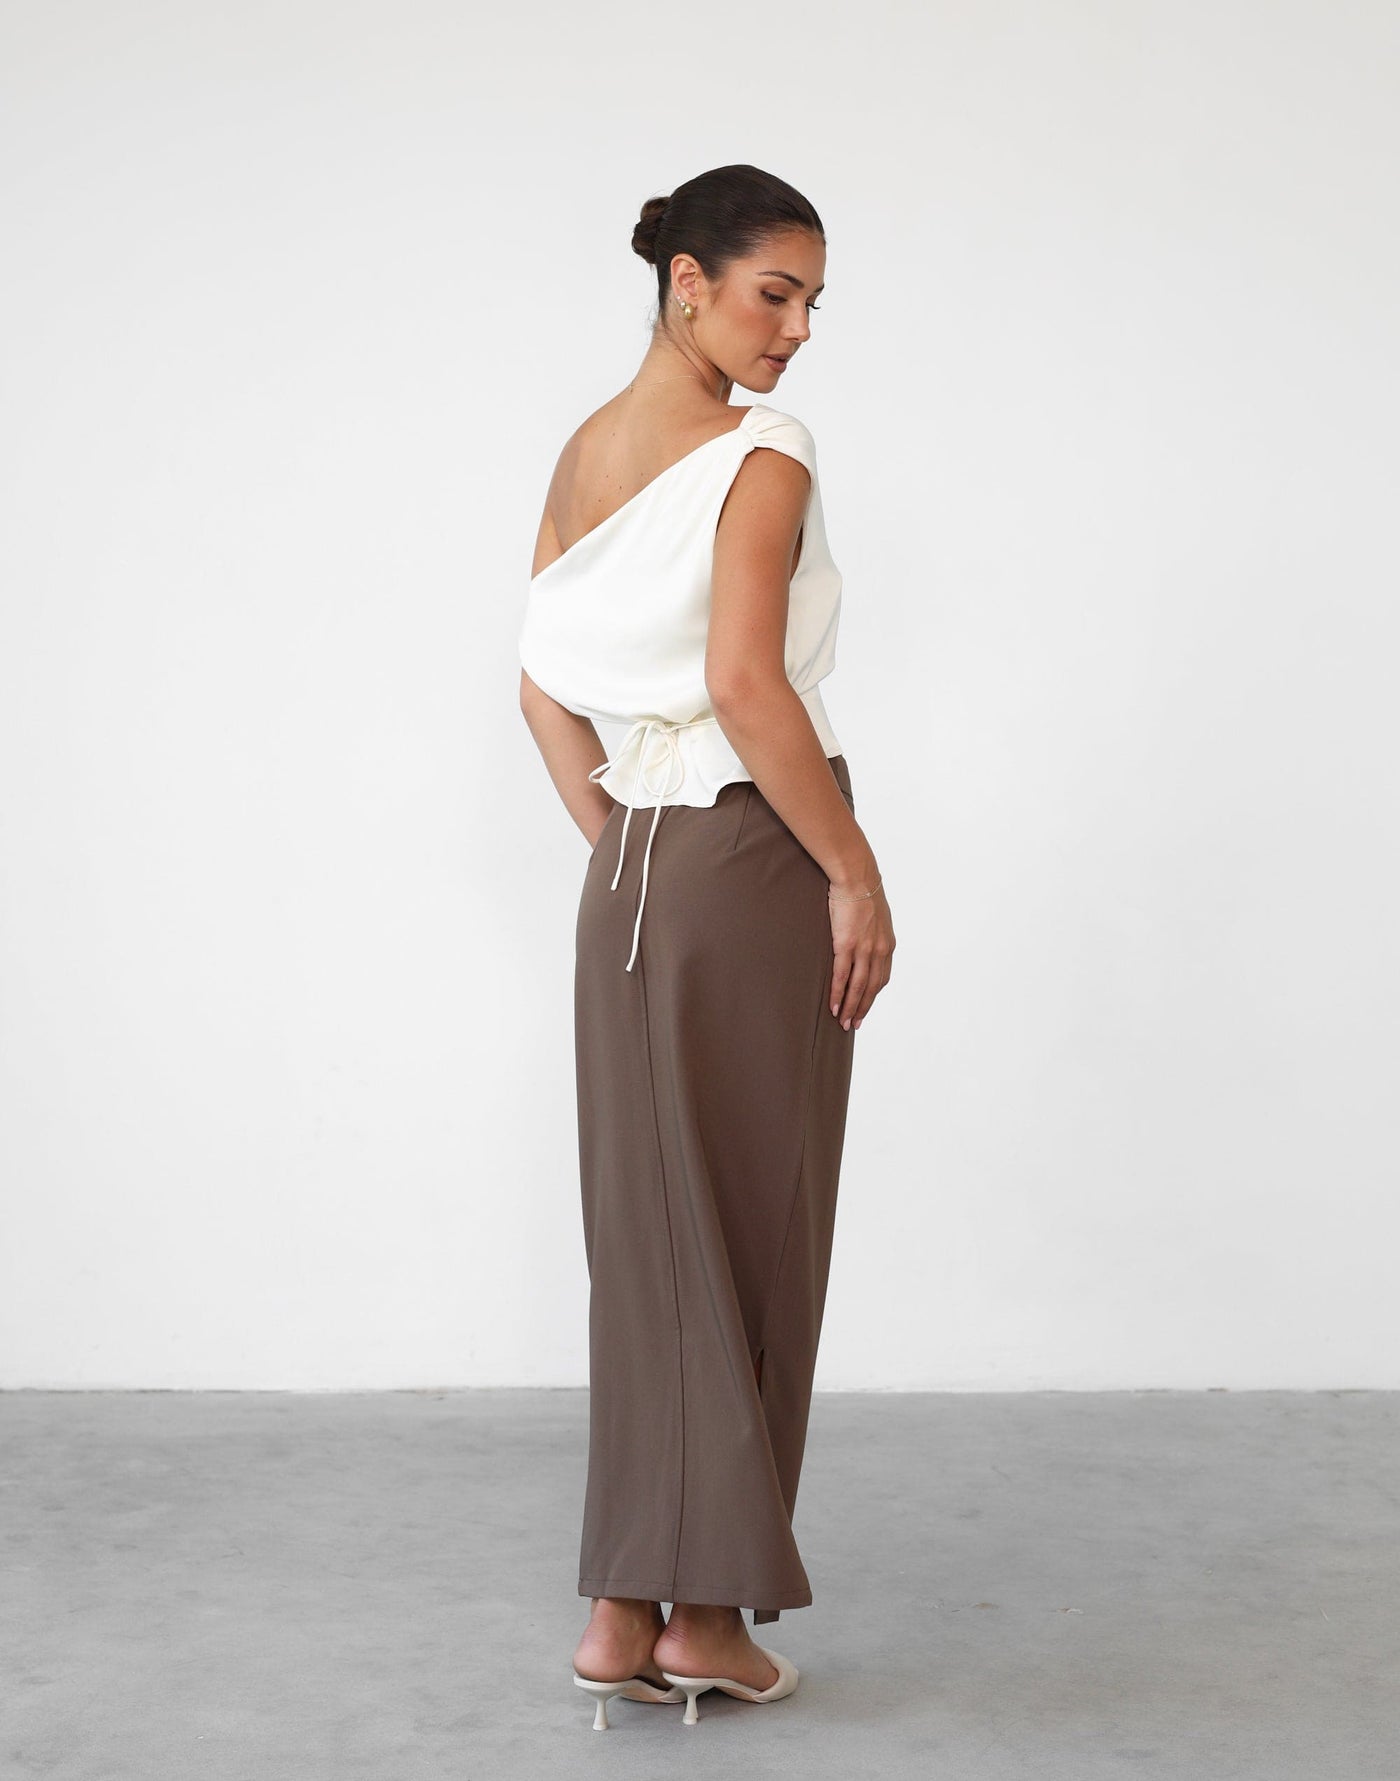 Astylar Skirt (Cocoa) - Button Closure Tailored Maxi Skirt - Women's Skirt - Charcoal Clothing